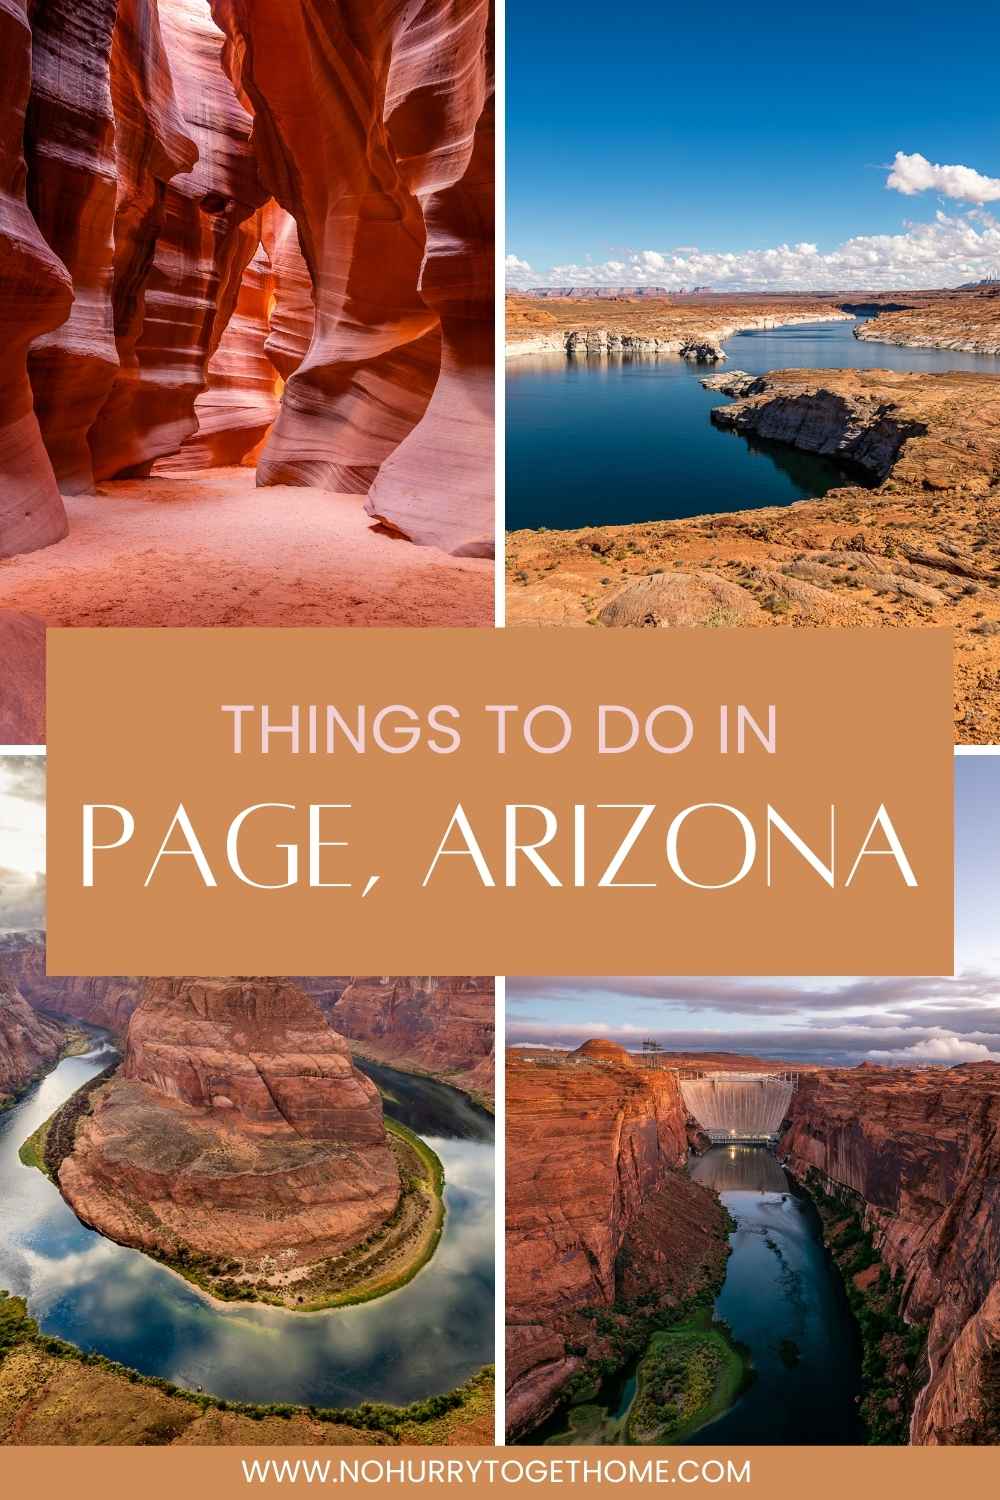 wondering what to do in Page? If you're headed to the Arizona desert, here's the ultimate list of things to do in Page, Az